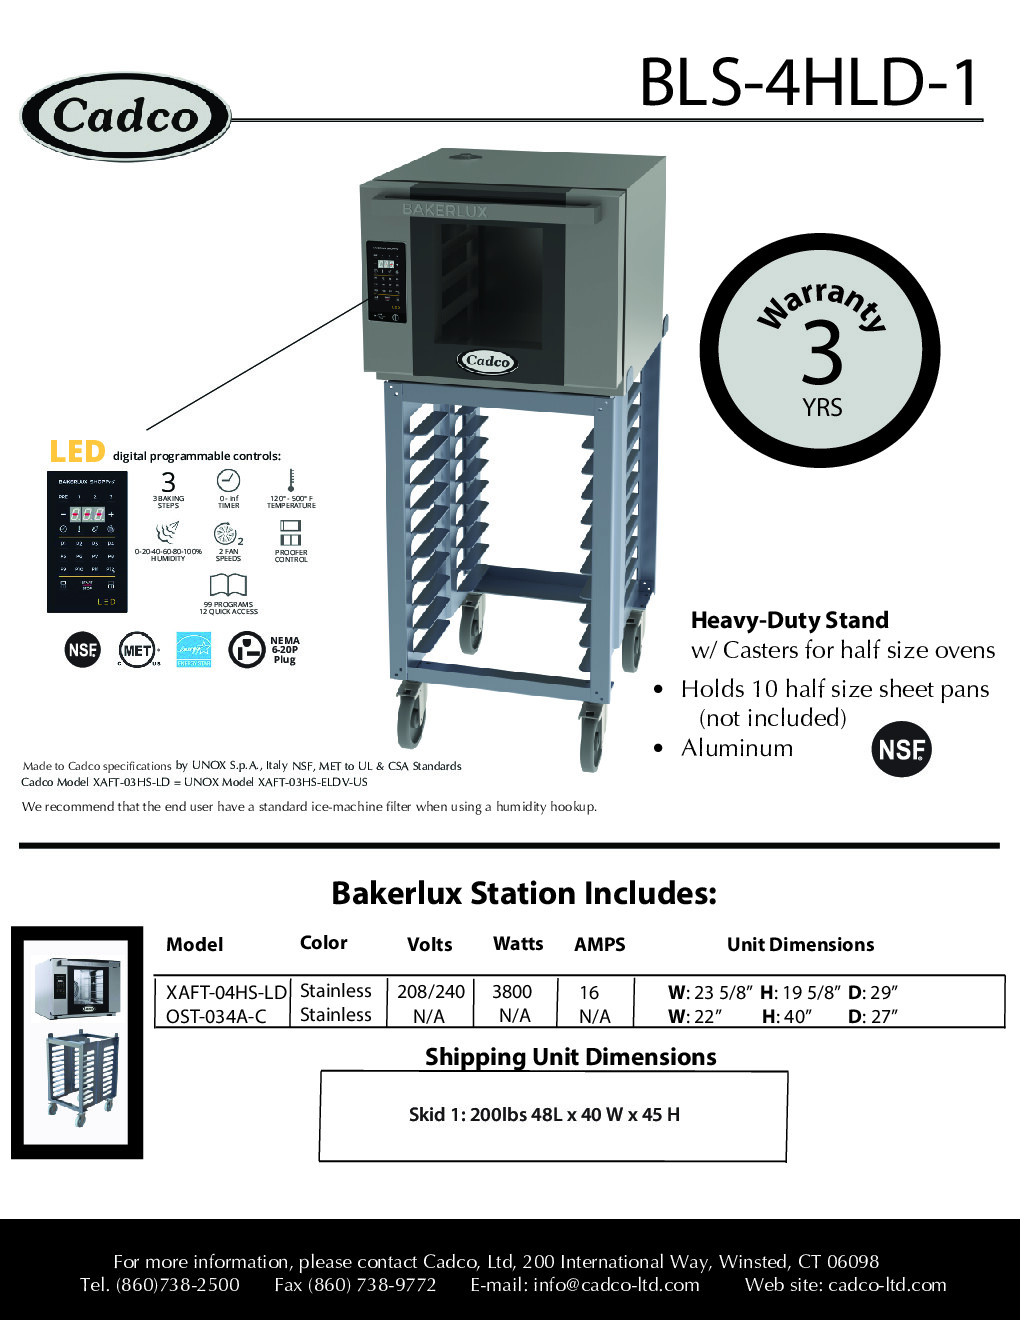 Cadco BLS-4HLD-1 Single-Deck Electric Convection Oven w/ Digital Touch Controls, Haf-Size